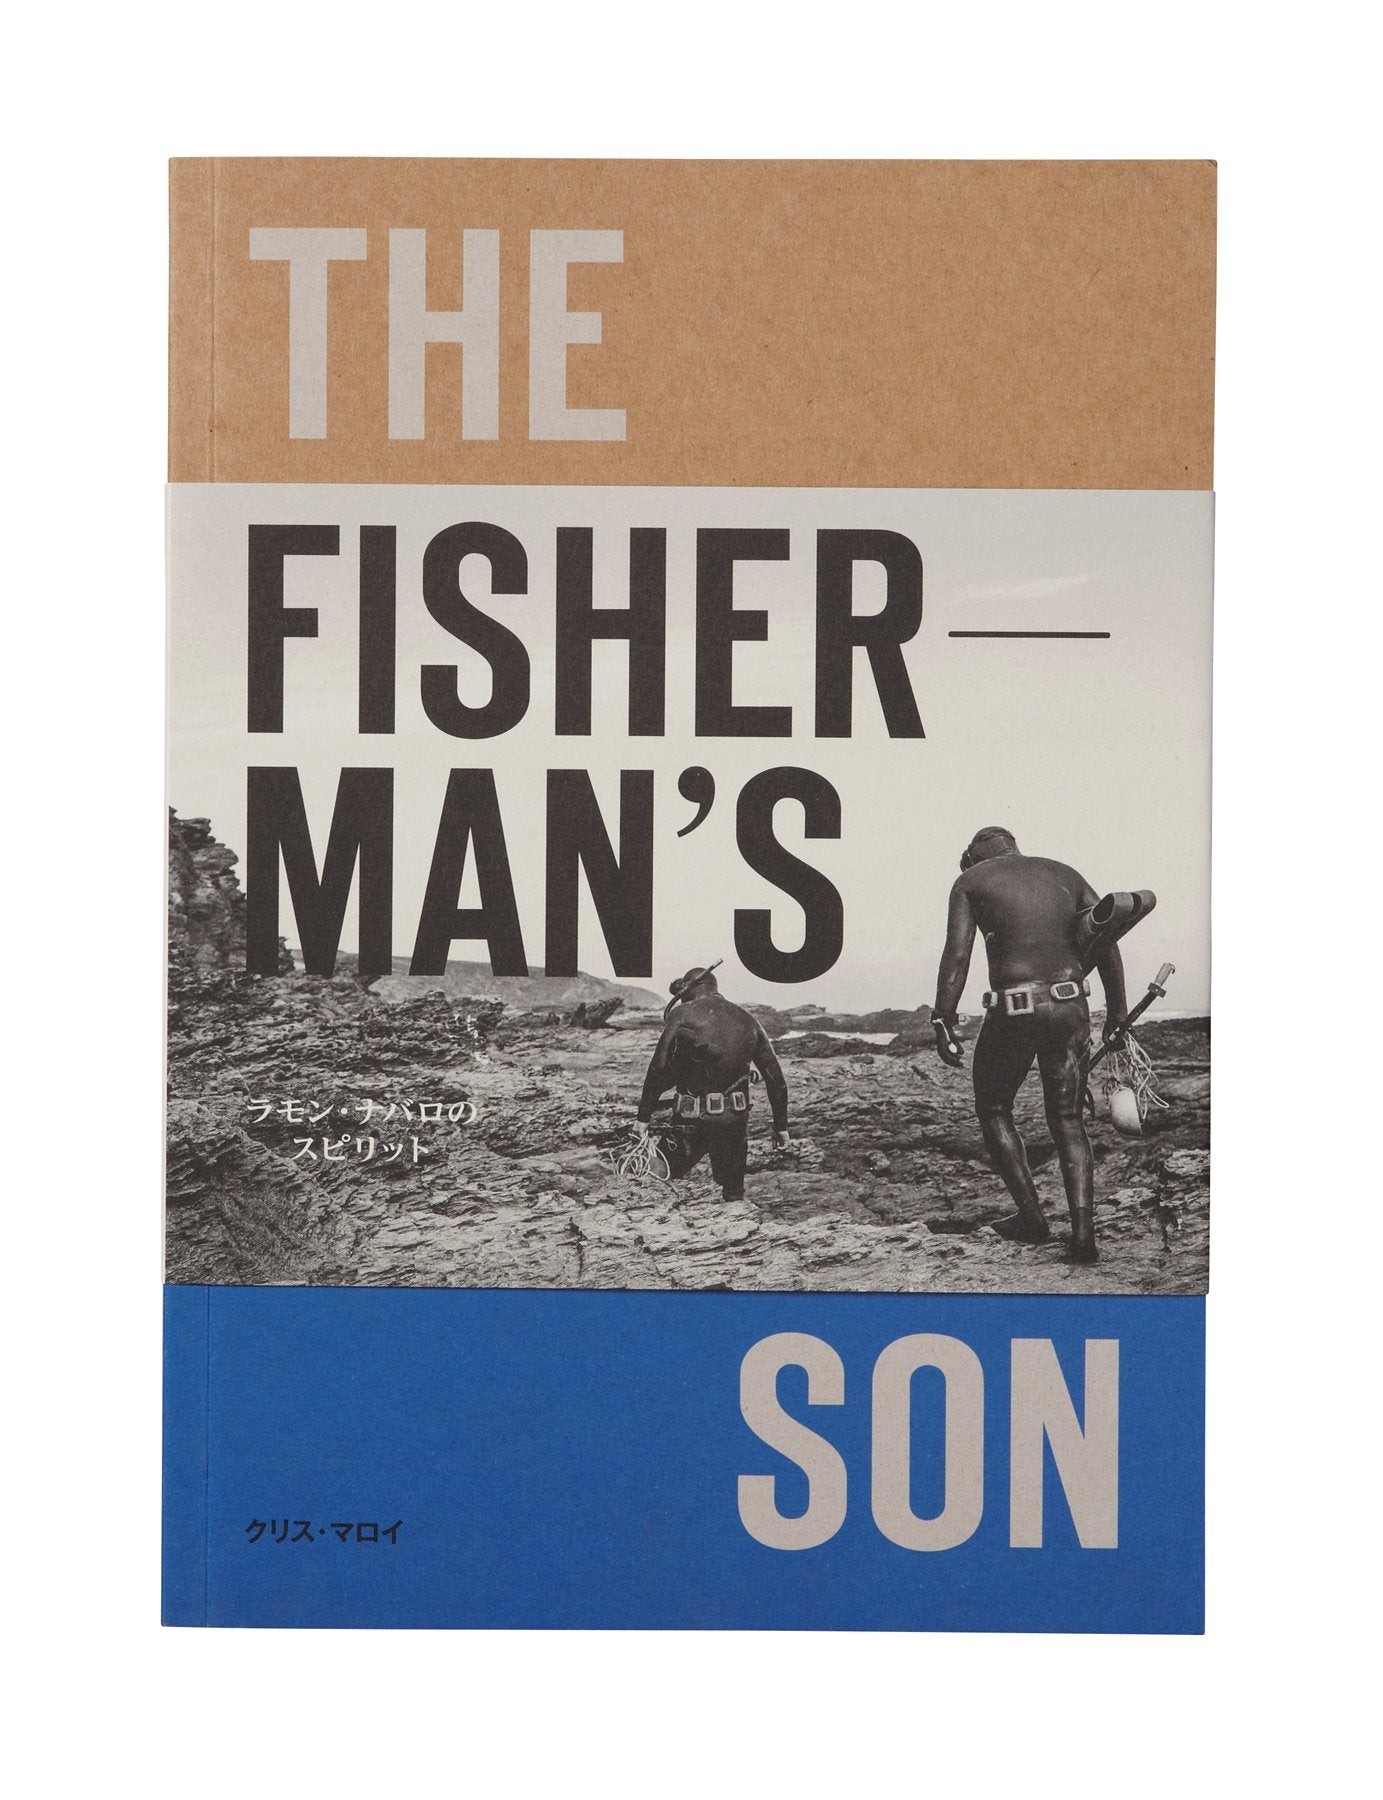 The Fisherman's Son